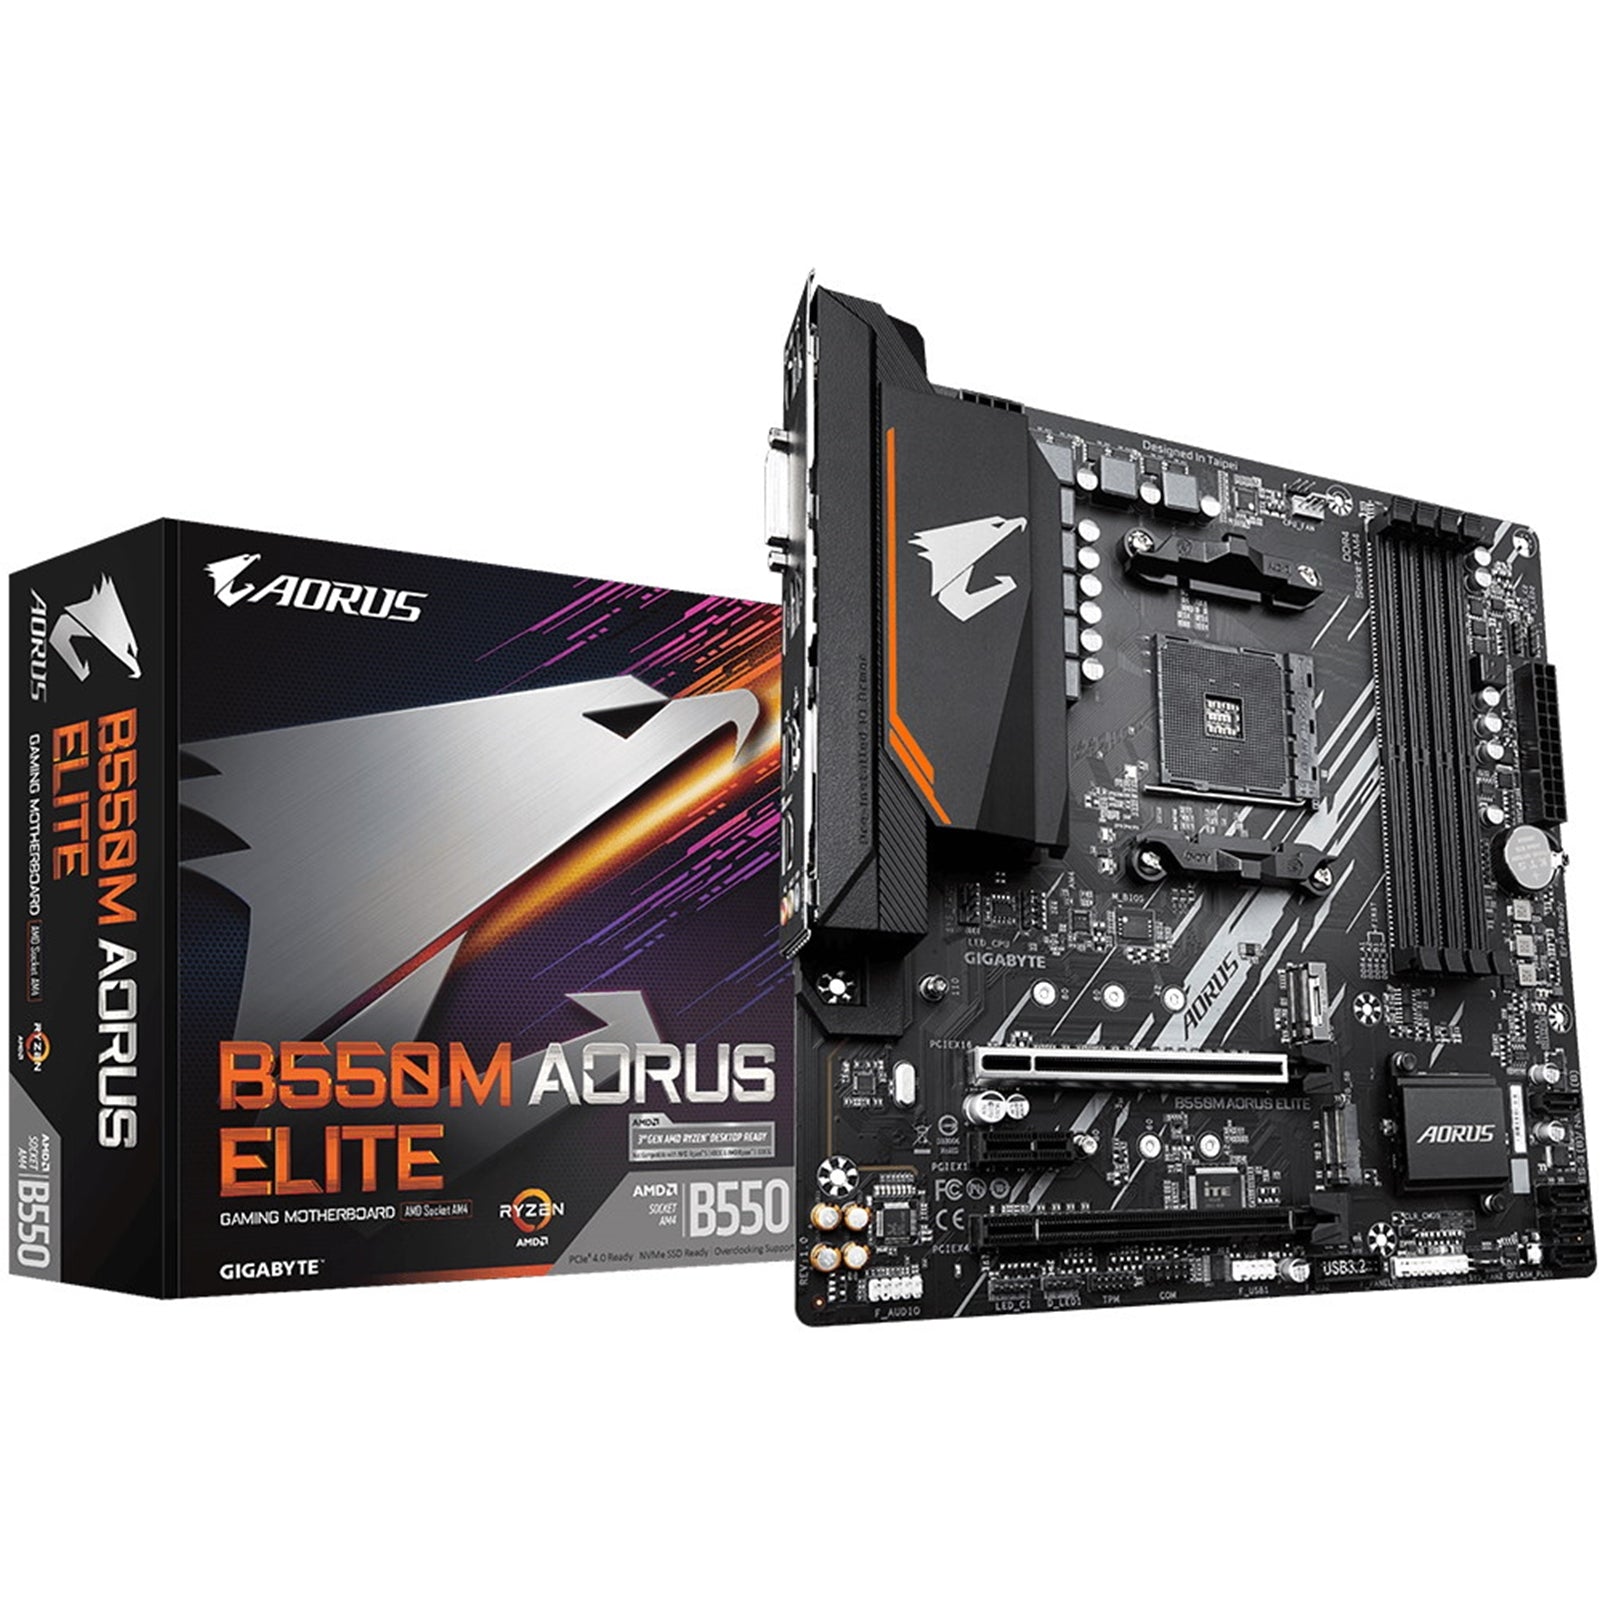 Gigabyte B550M AORUS ELITE - AMD Socket AM4 Micro ATX Motherboard with Advanced Gaming Features